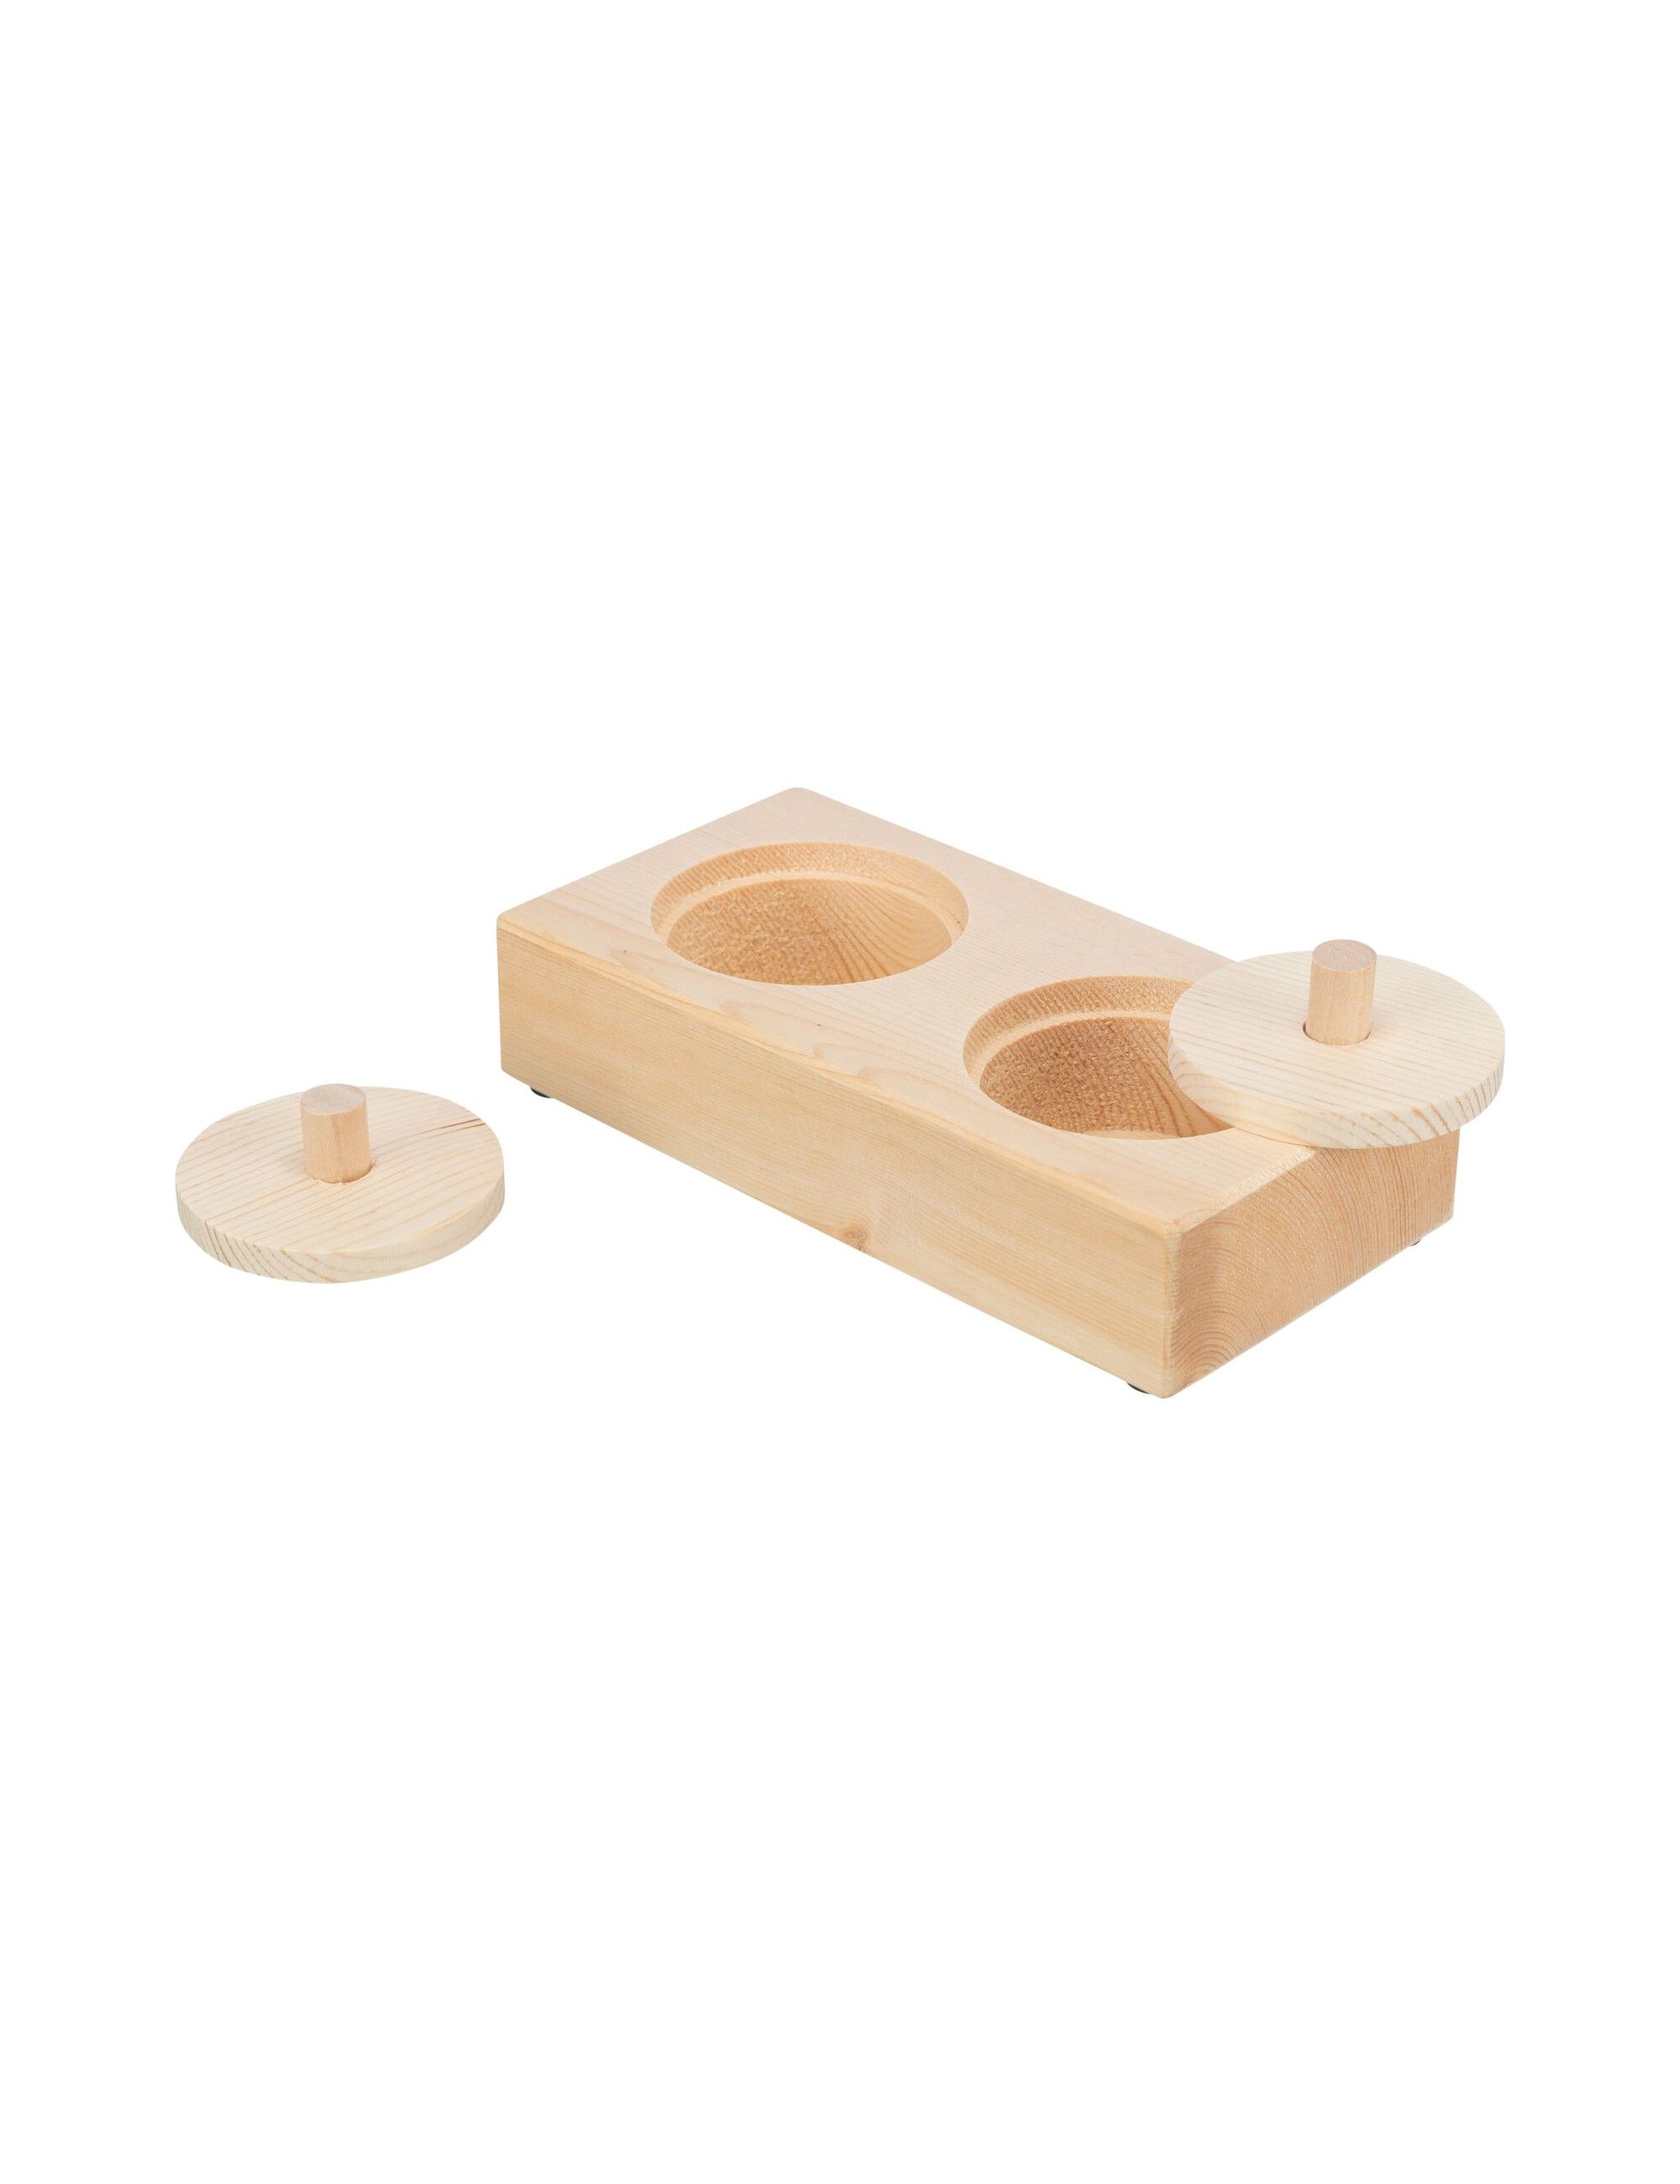 TRIXIE - Wooden “Snack Box” Game